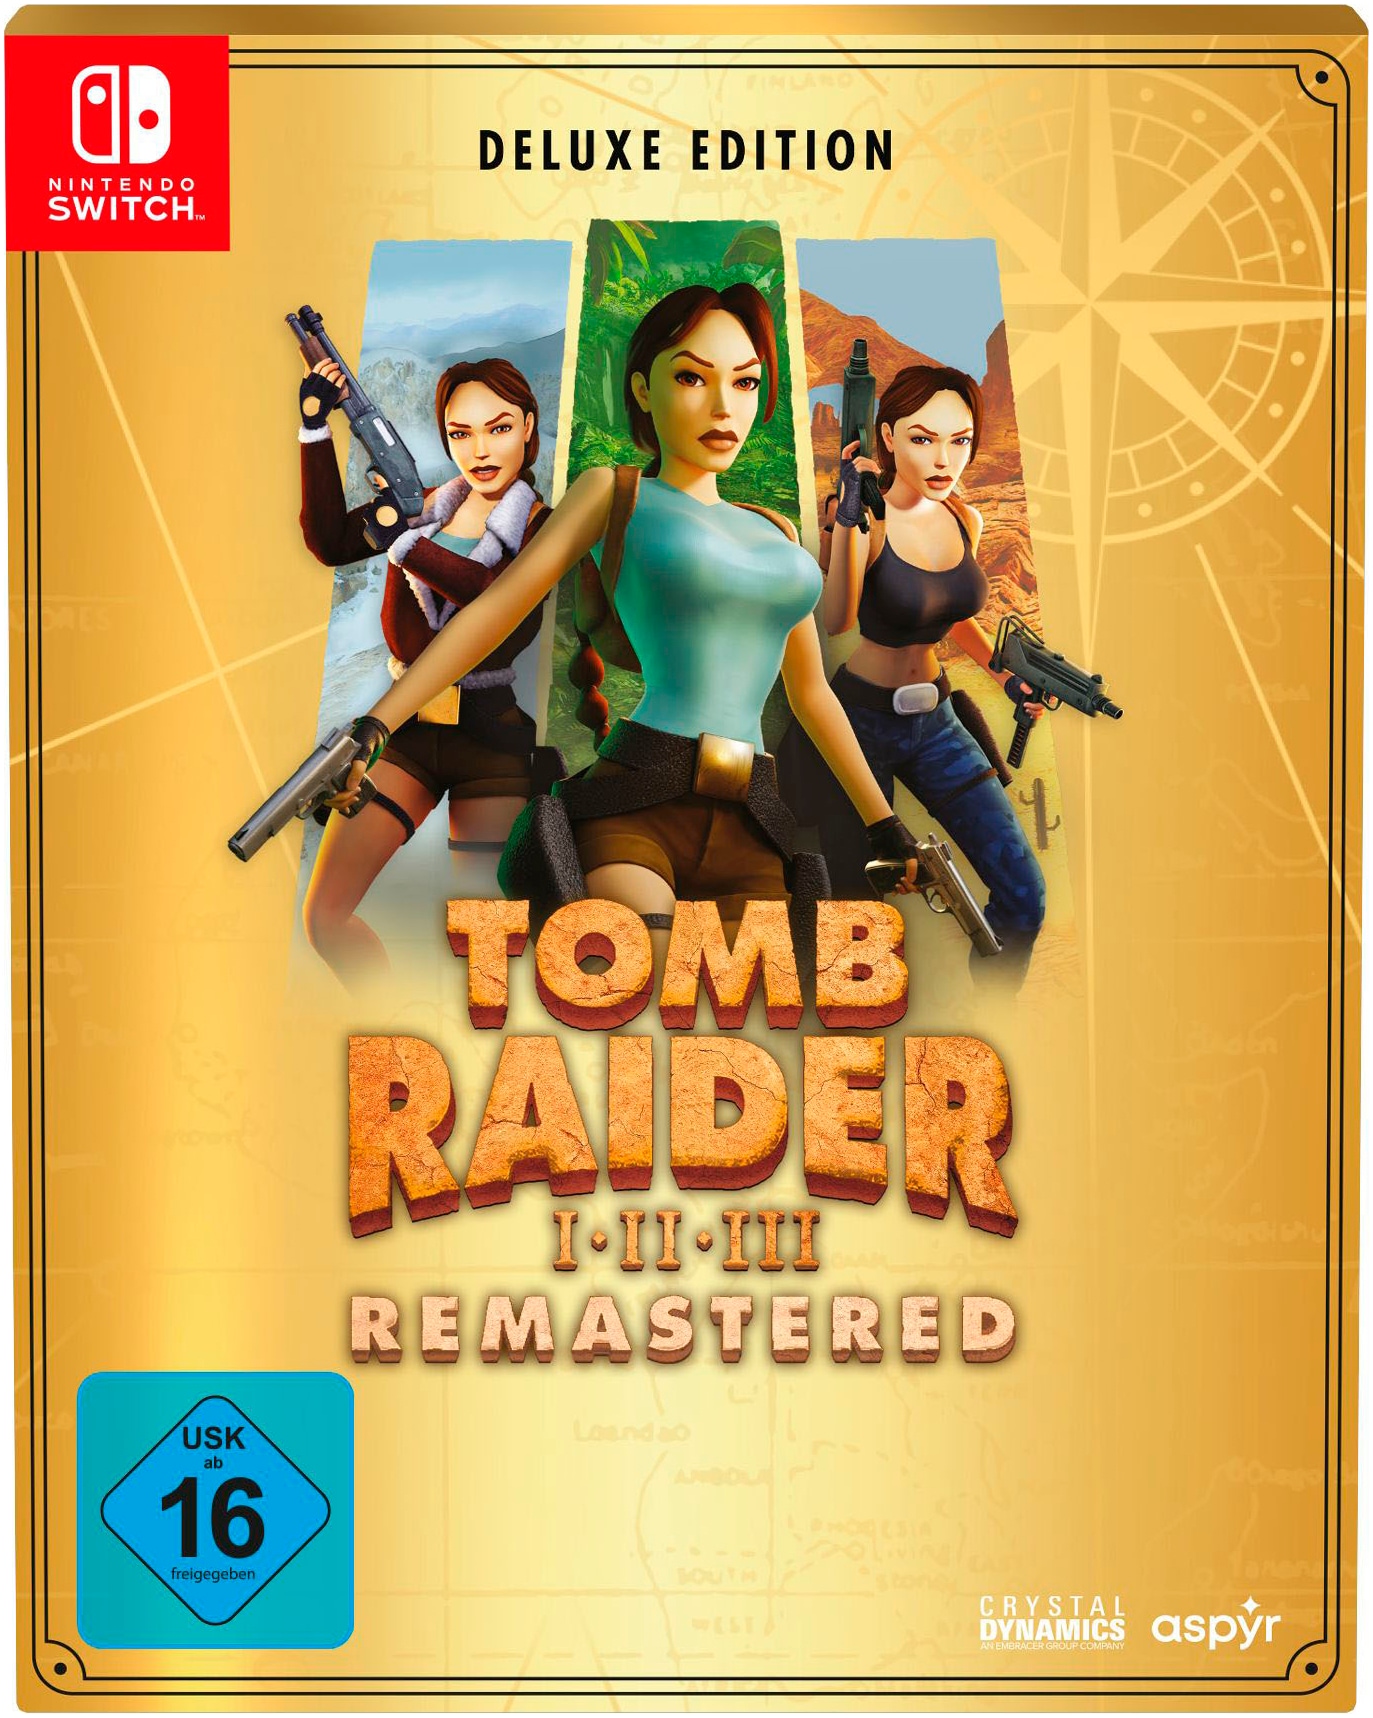 Spielesoftware »Tomb Raider I-III Remastered Deluxe Edition«, Nintendo Switch